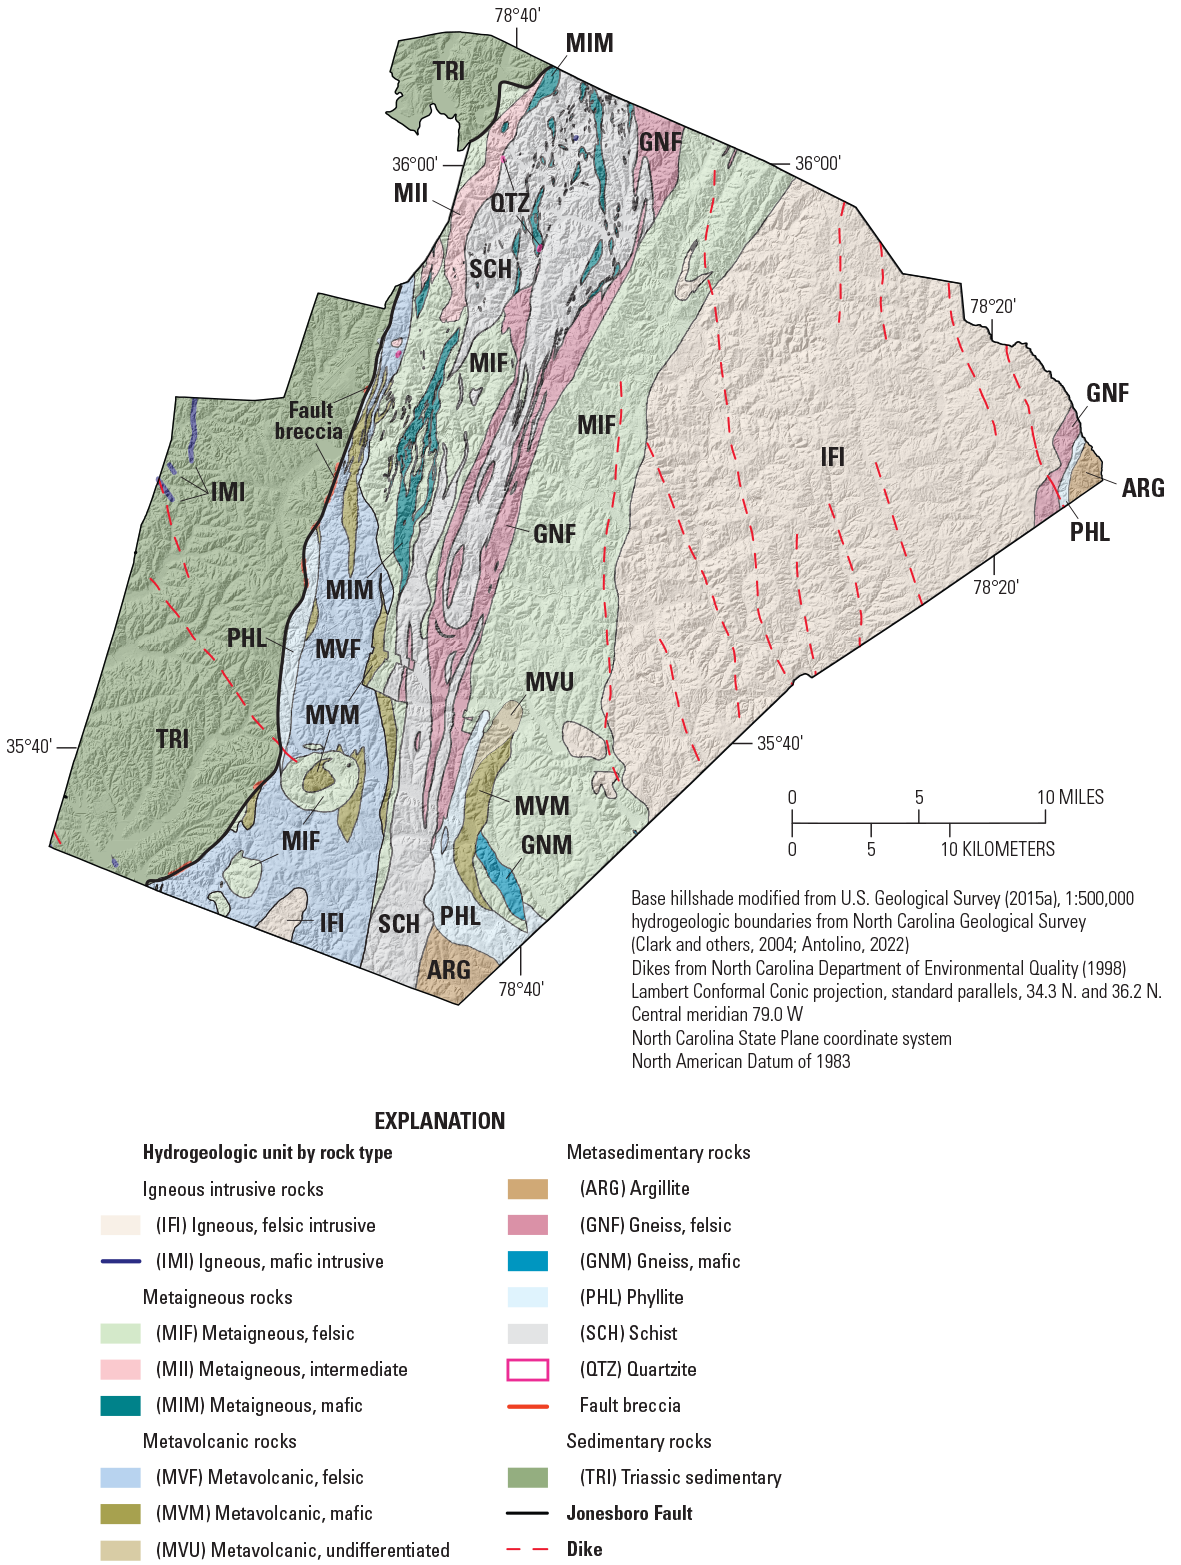 Map showing the hydrogeologic units by rock type, as well as locations of major faults
                     and dikes within Wake County.